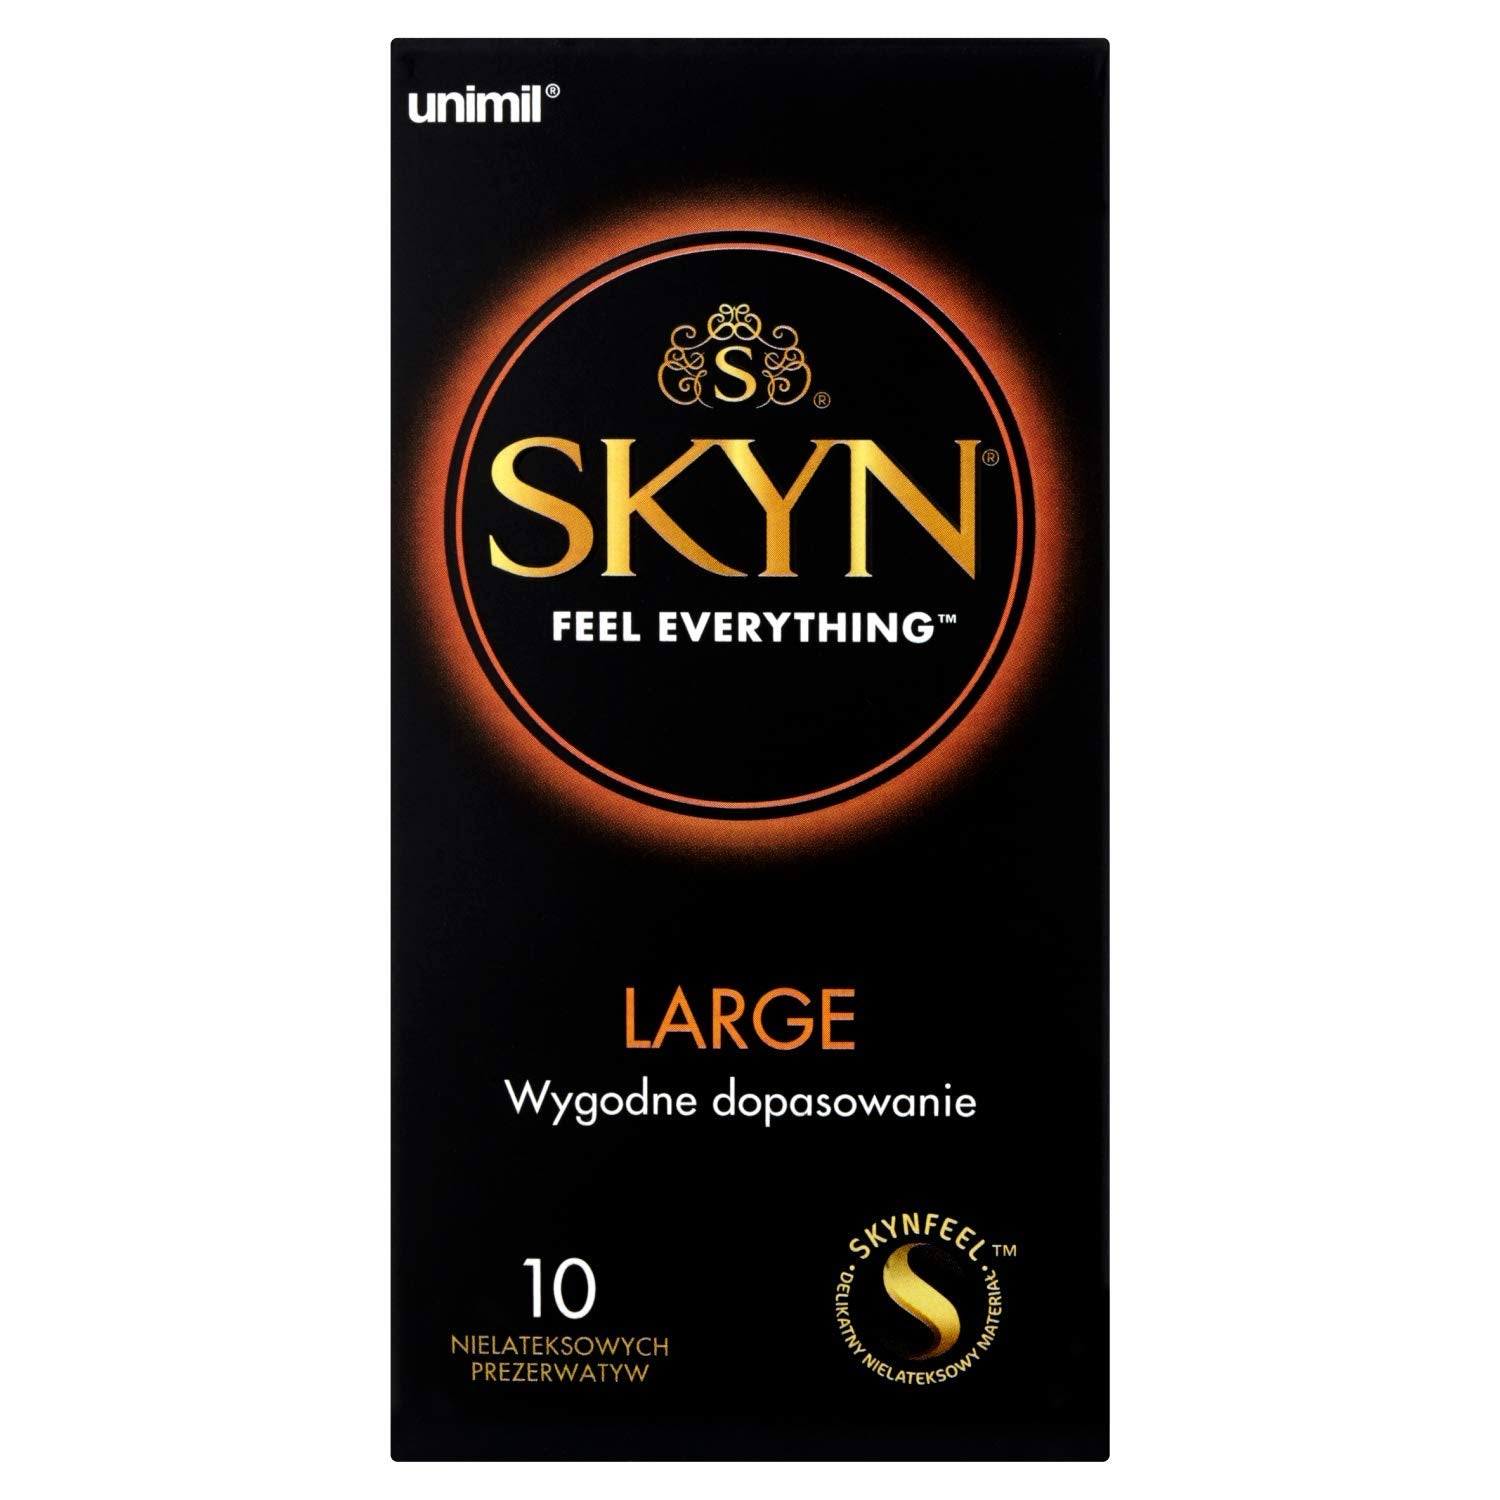 SKYN® Large (XL/King Size) Non-Latex Condoms, Pack of 10 x 1